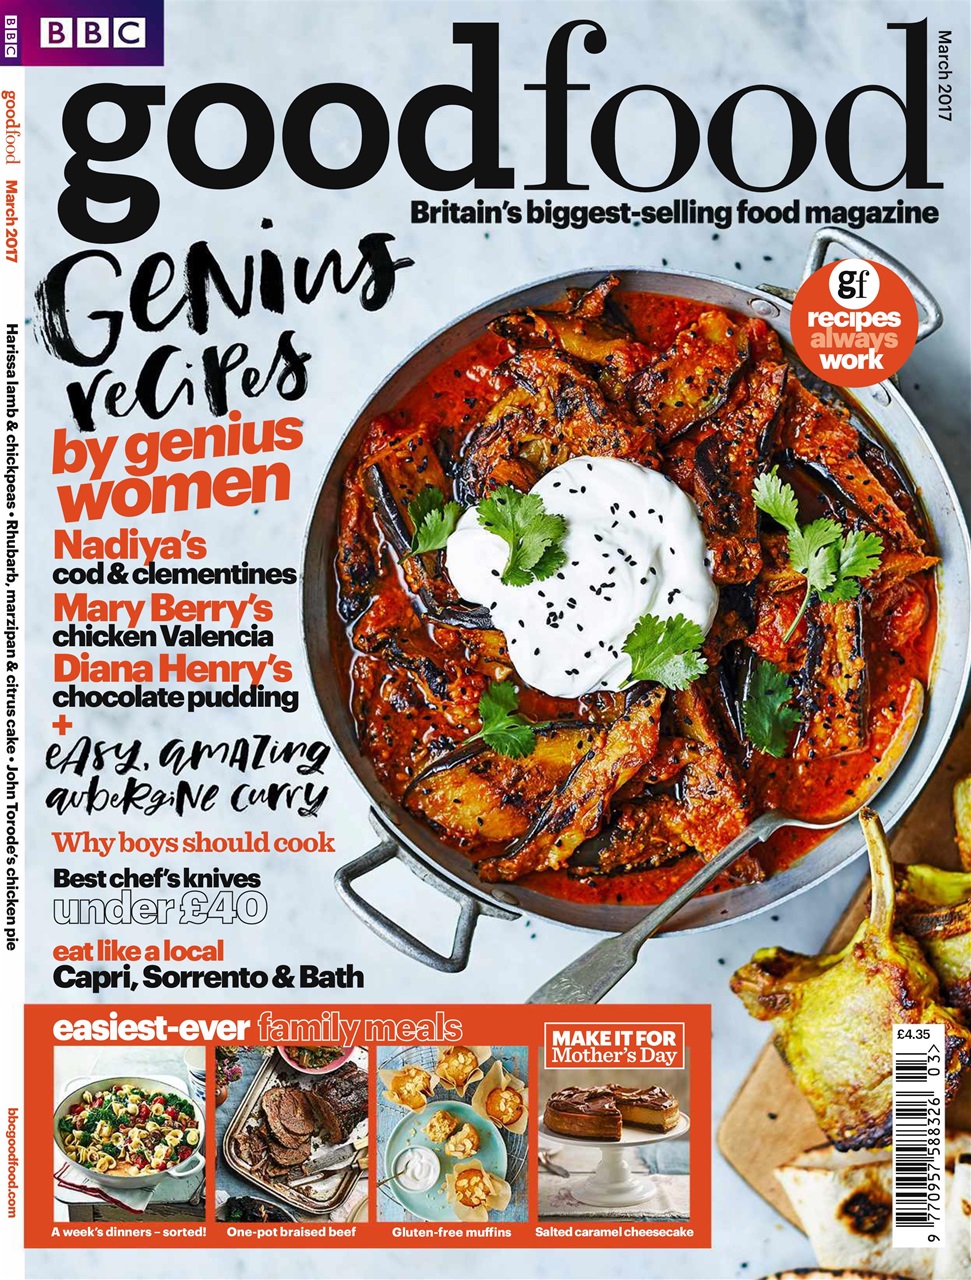 BBC Good Food Magazine - March 2017 Subscriptions | Pocketmags